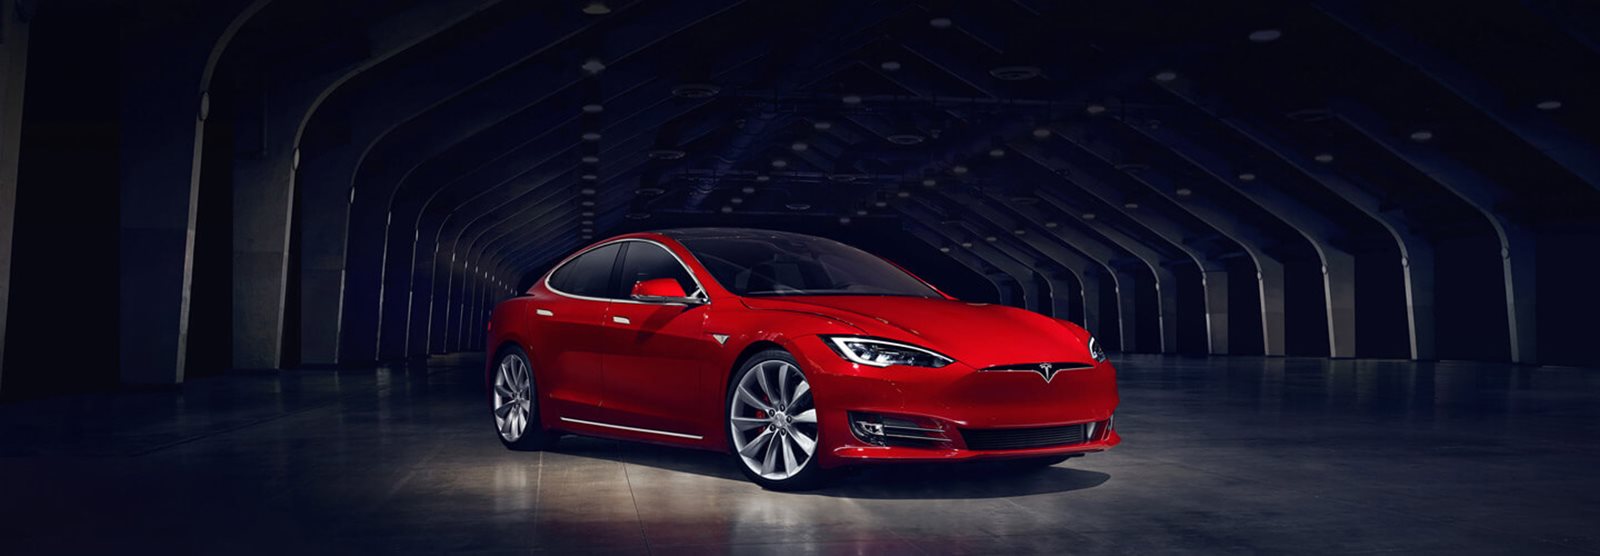 2018 Tesla Model S Front Angle View